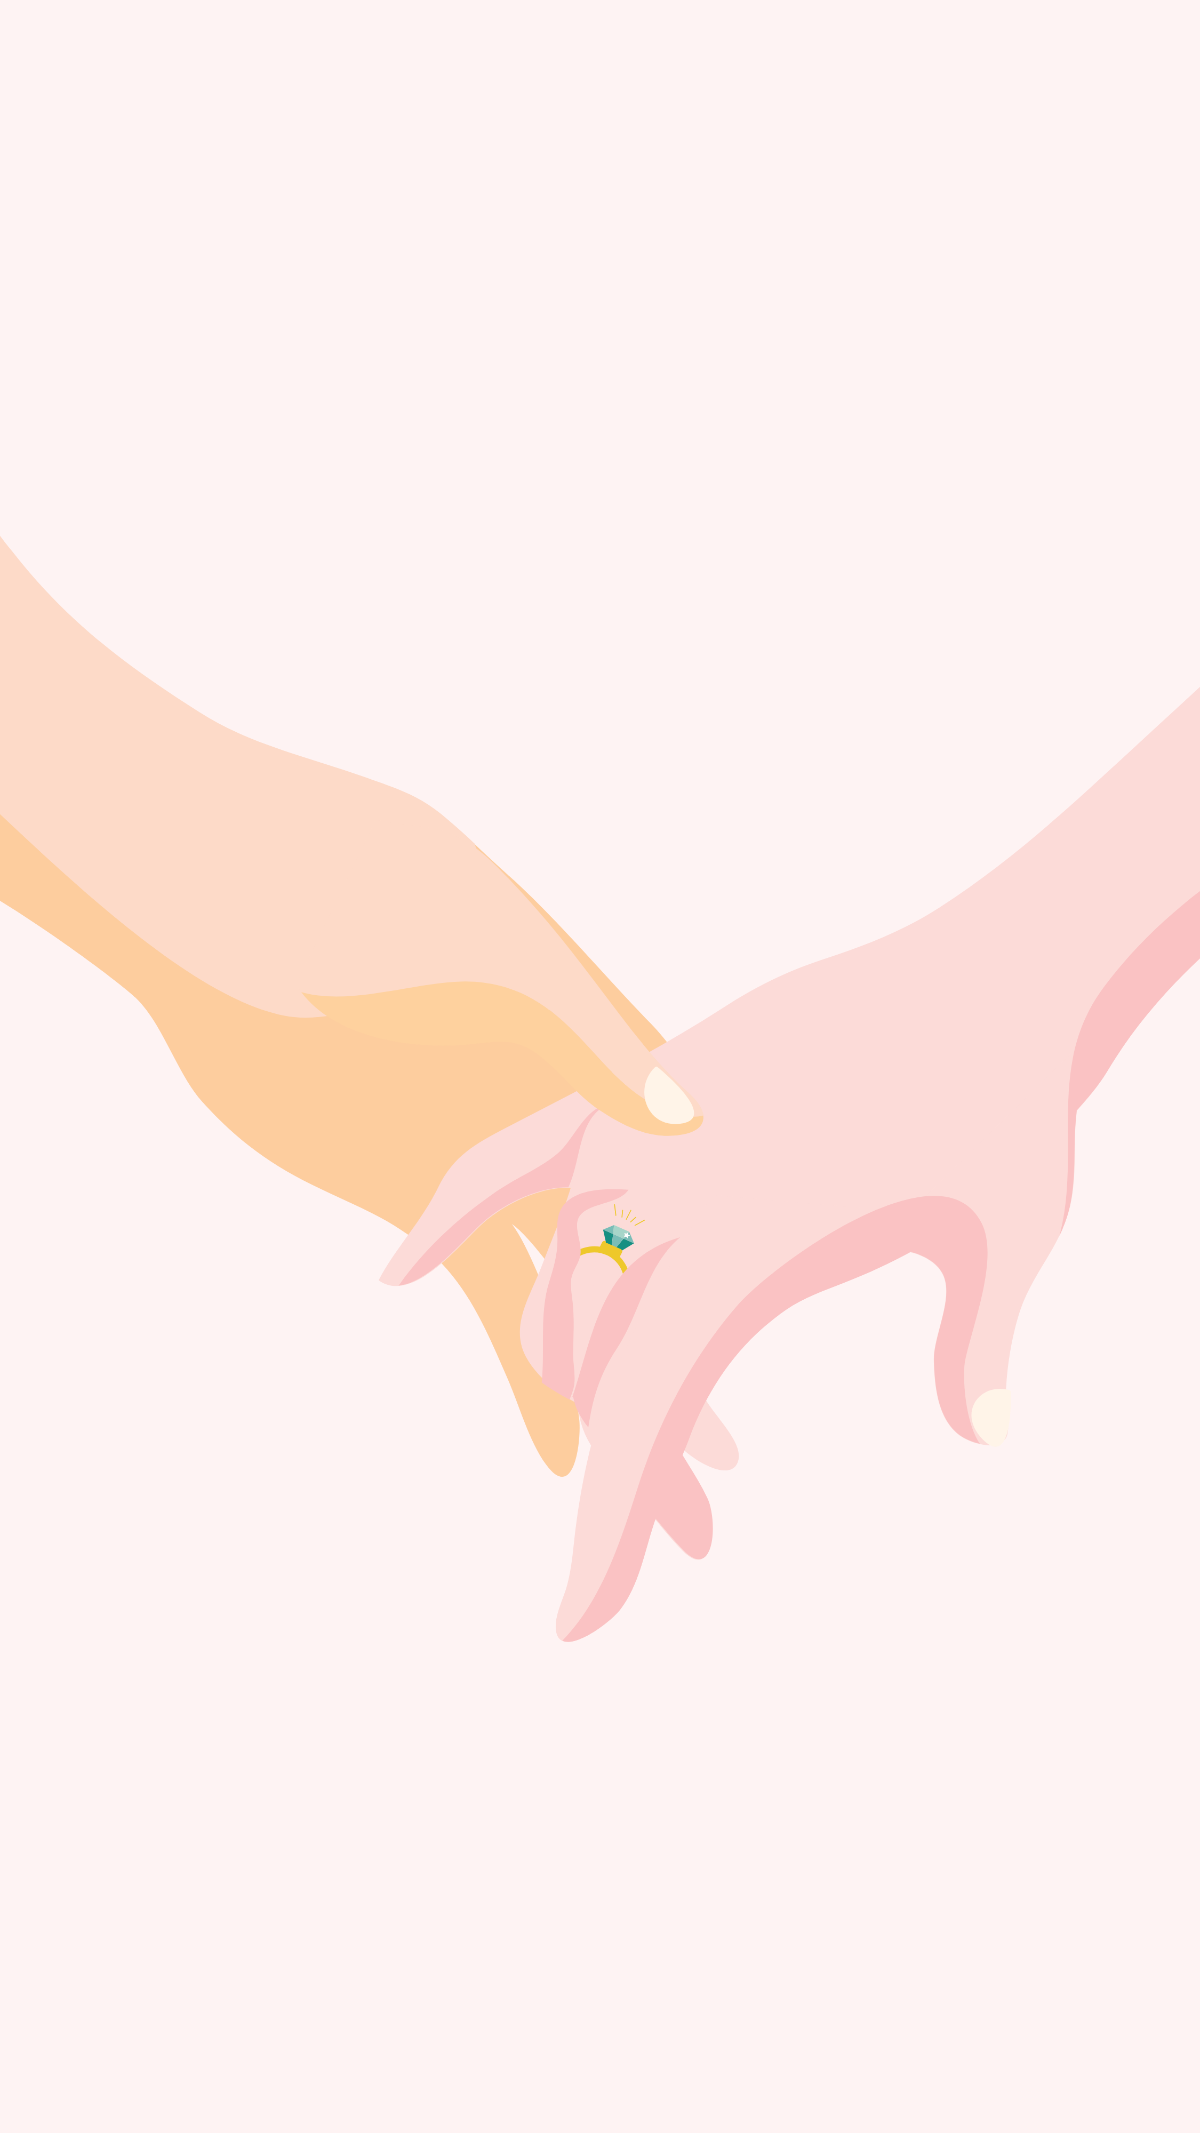 Wedding Holding Hands Mobile Background Template